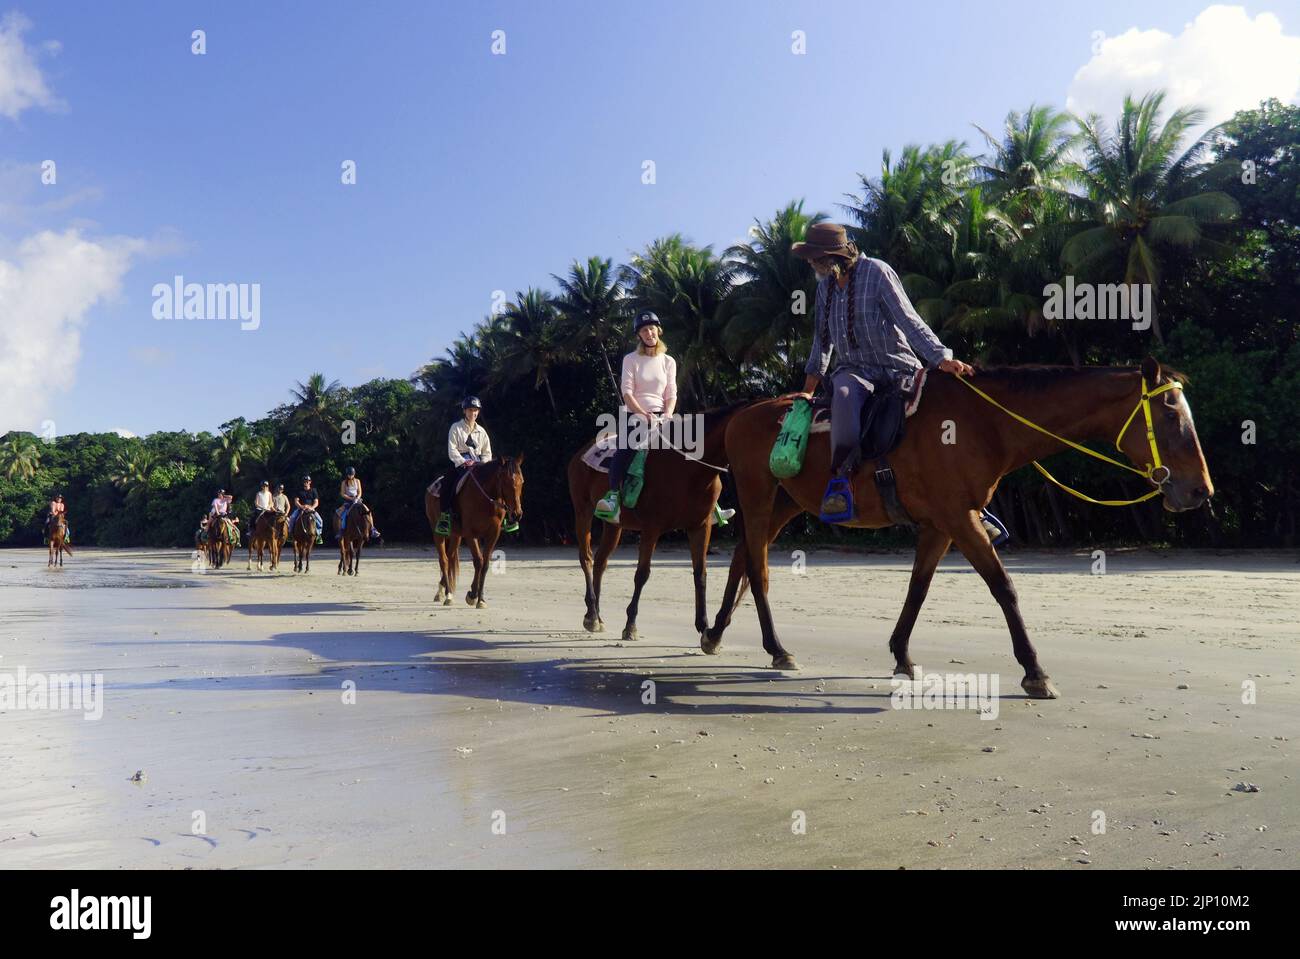 Tourists riding horses on the beach at Cape Tribulation, Daintree region, north of Cairns, Queensland, Australia. No MR or Pr Stock Photo